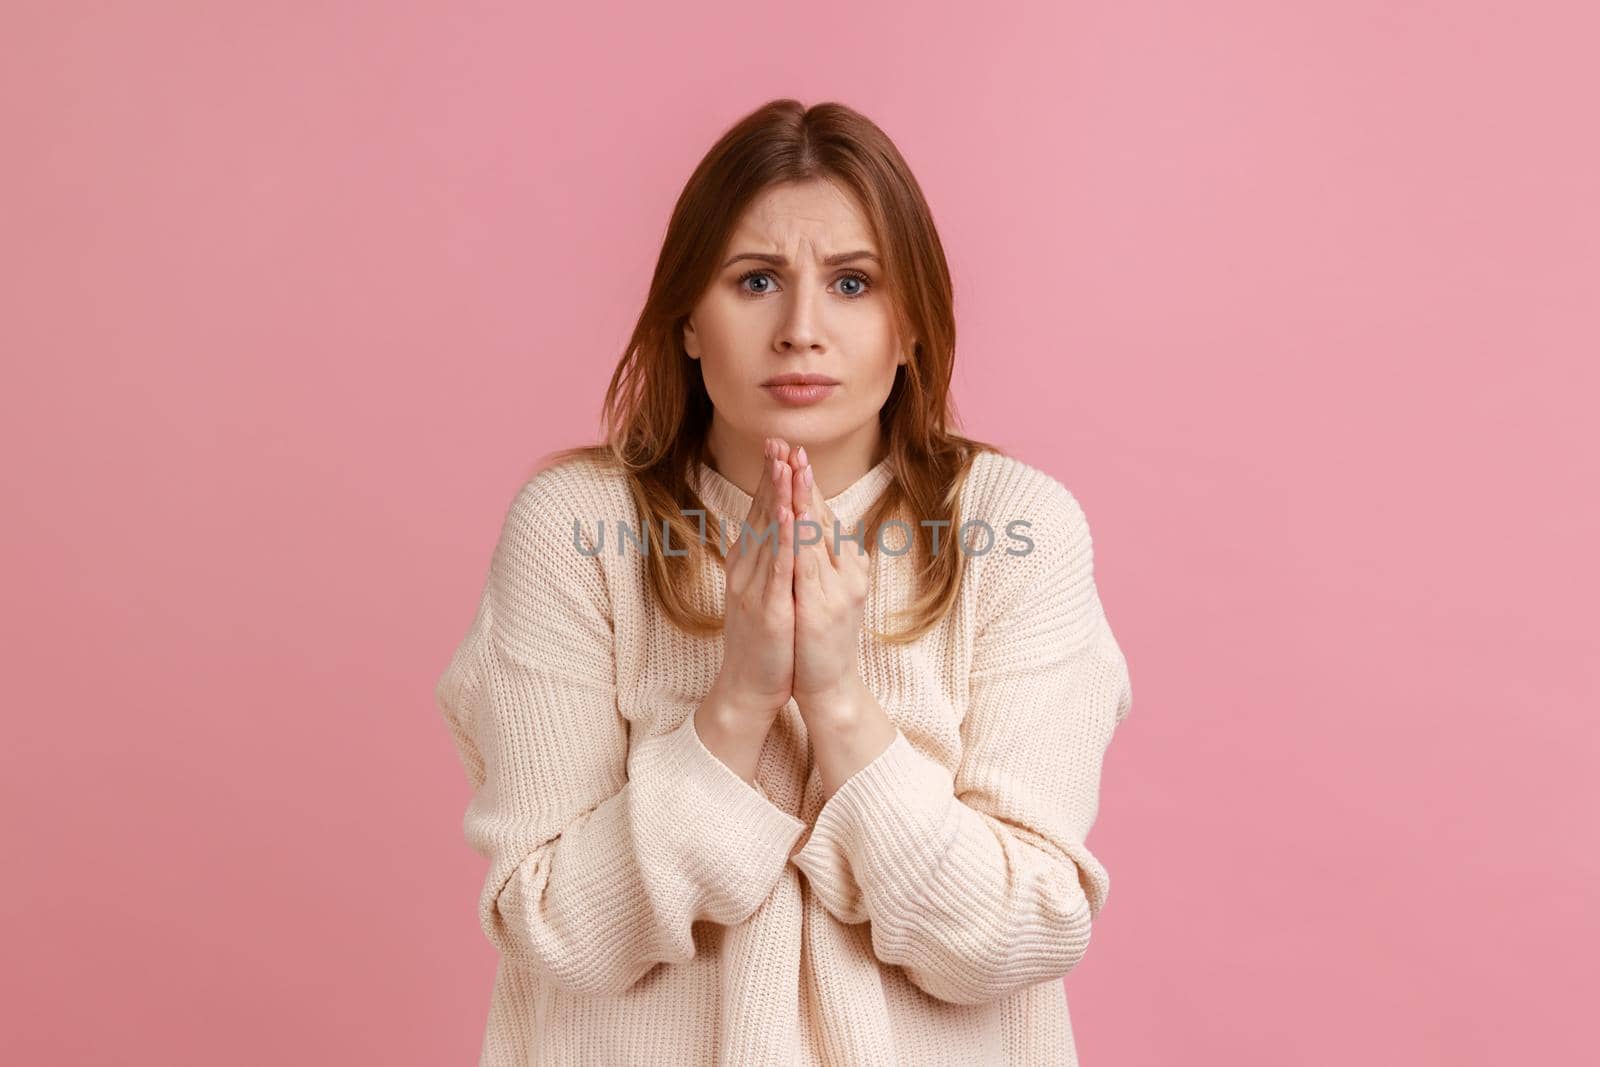 Portrait of attractive blond woman praying, begging with naughty and pleading grimace, gesture of asking apologizing, wearing white sweater. Indoor studio shot isolated on pink background.